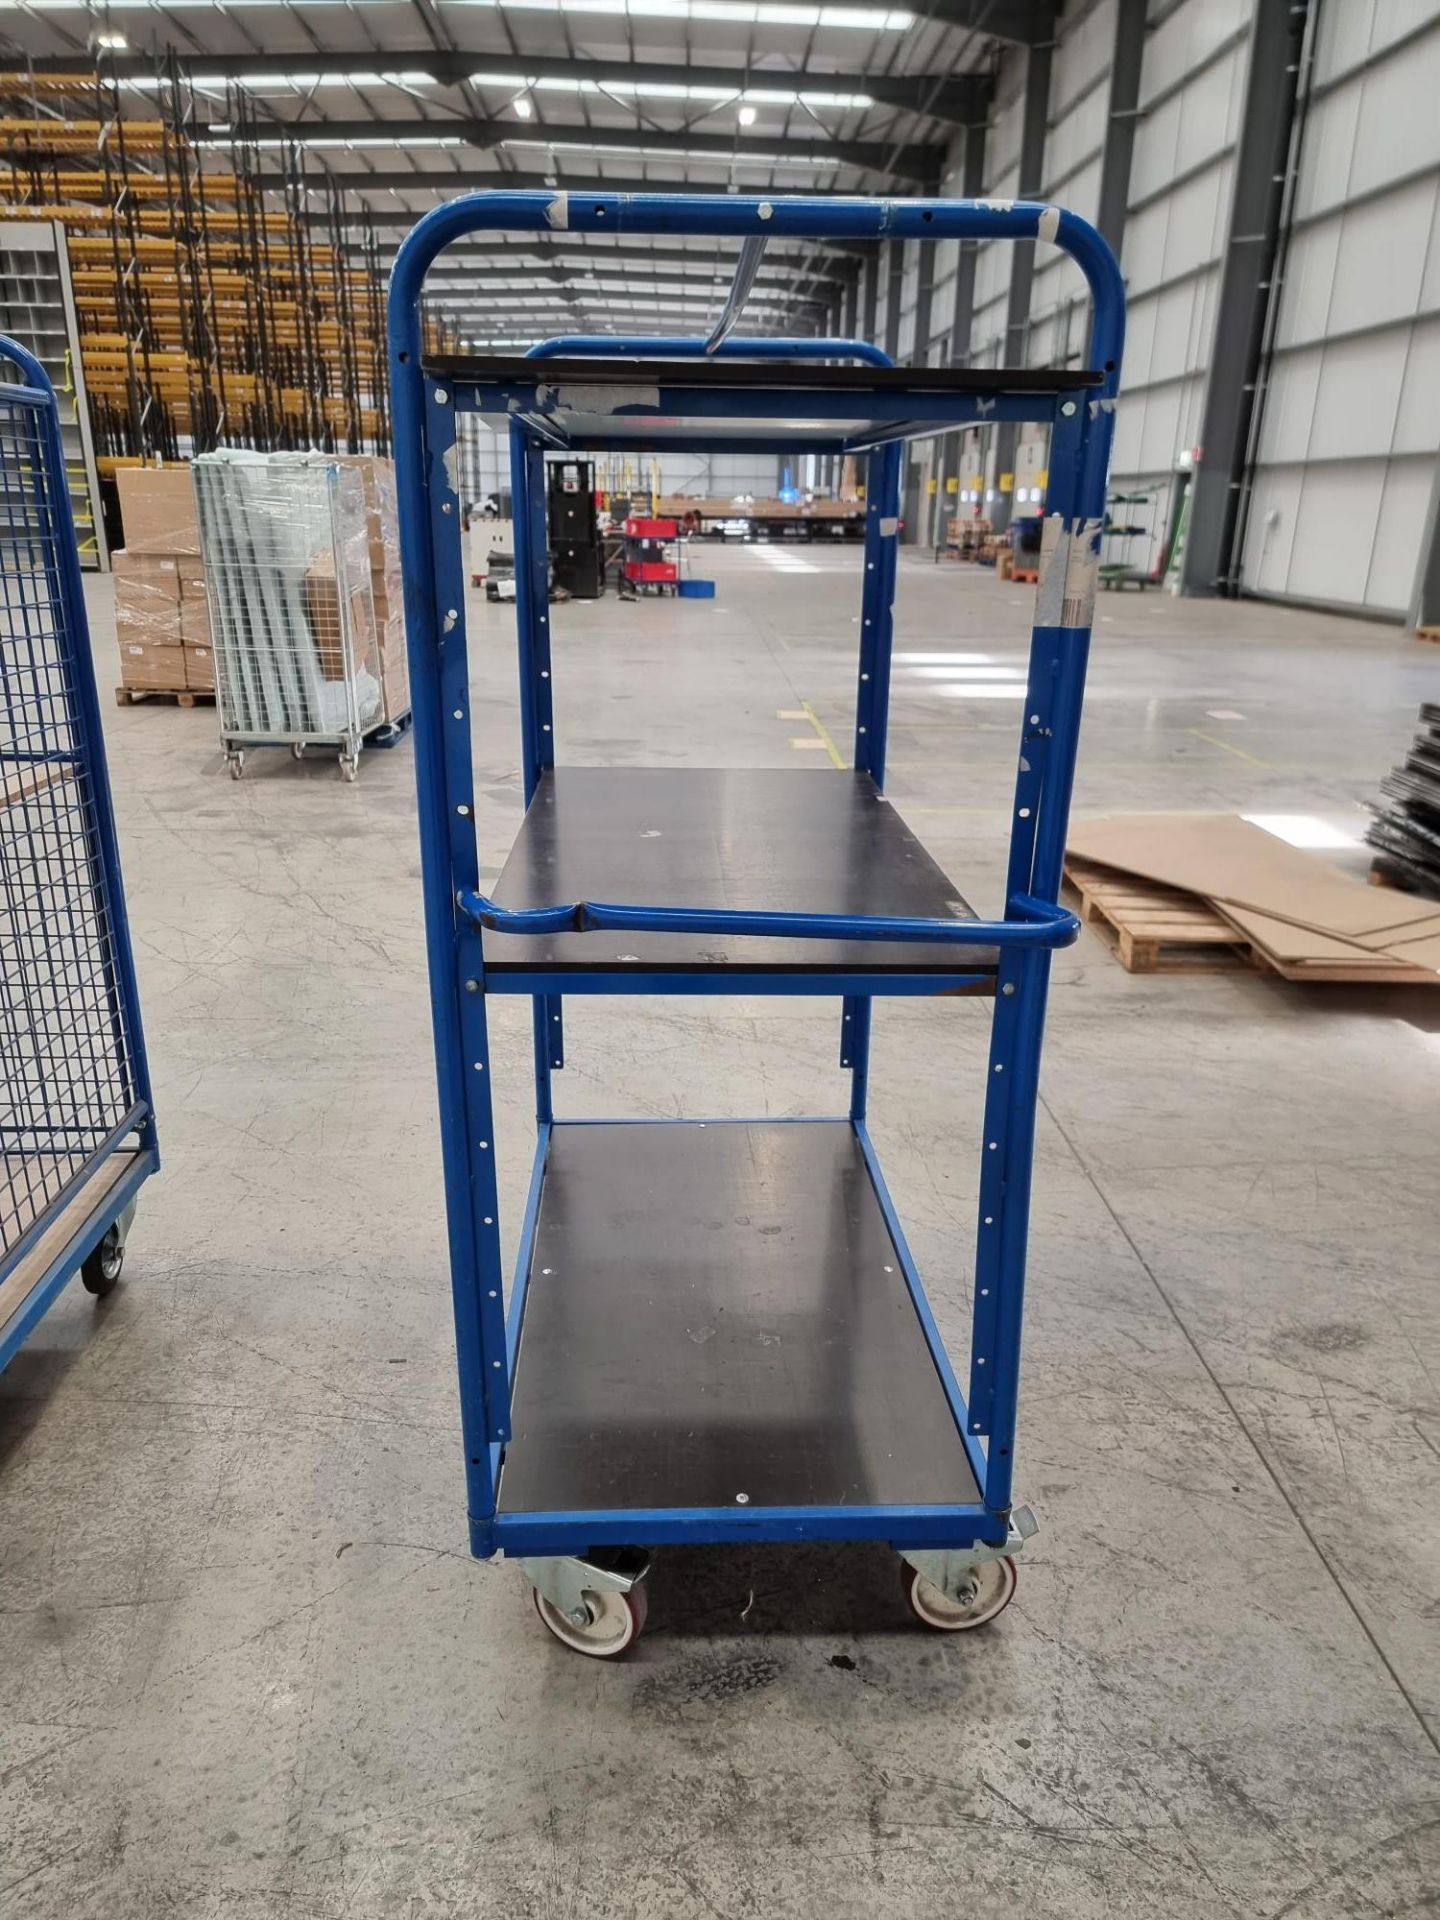 BIG DUG BLUE PICKING TROLLEY WITH RUBBER WHEELS - Image 2 of 2